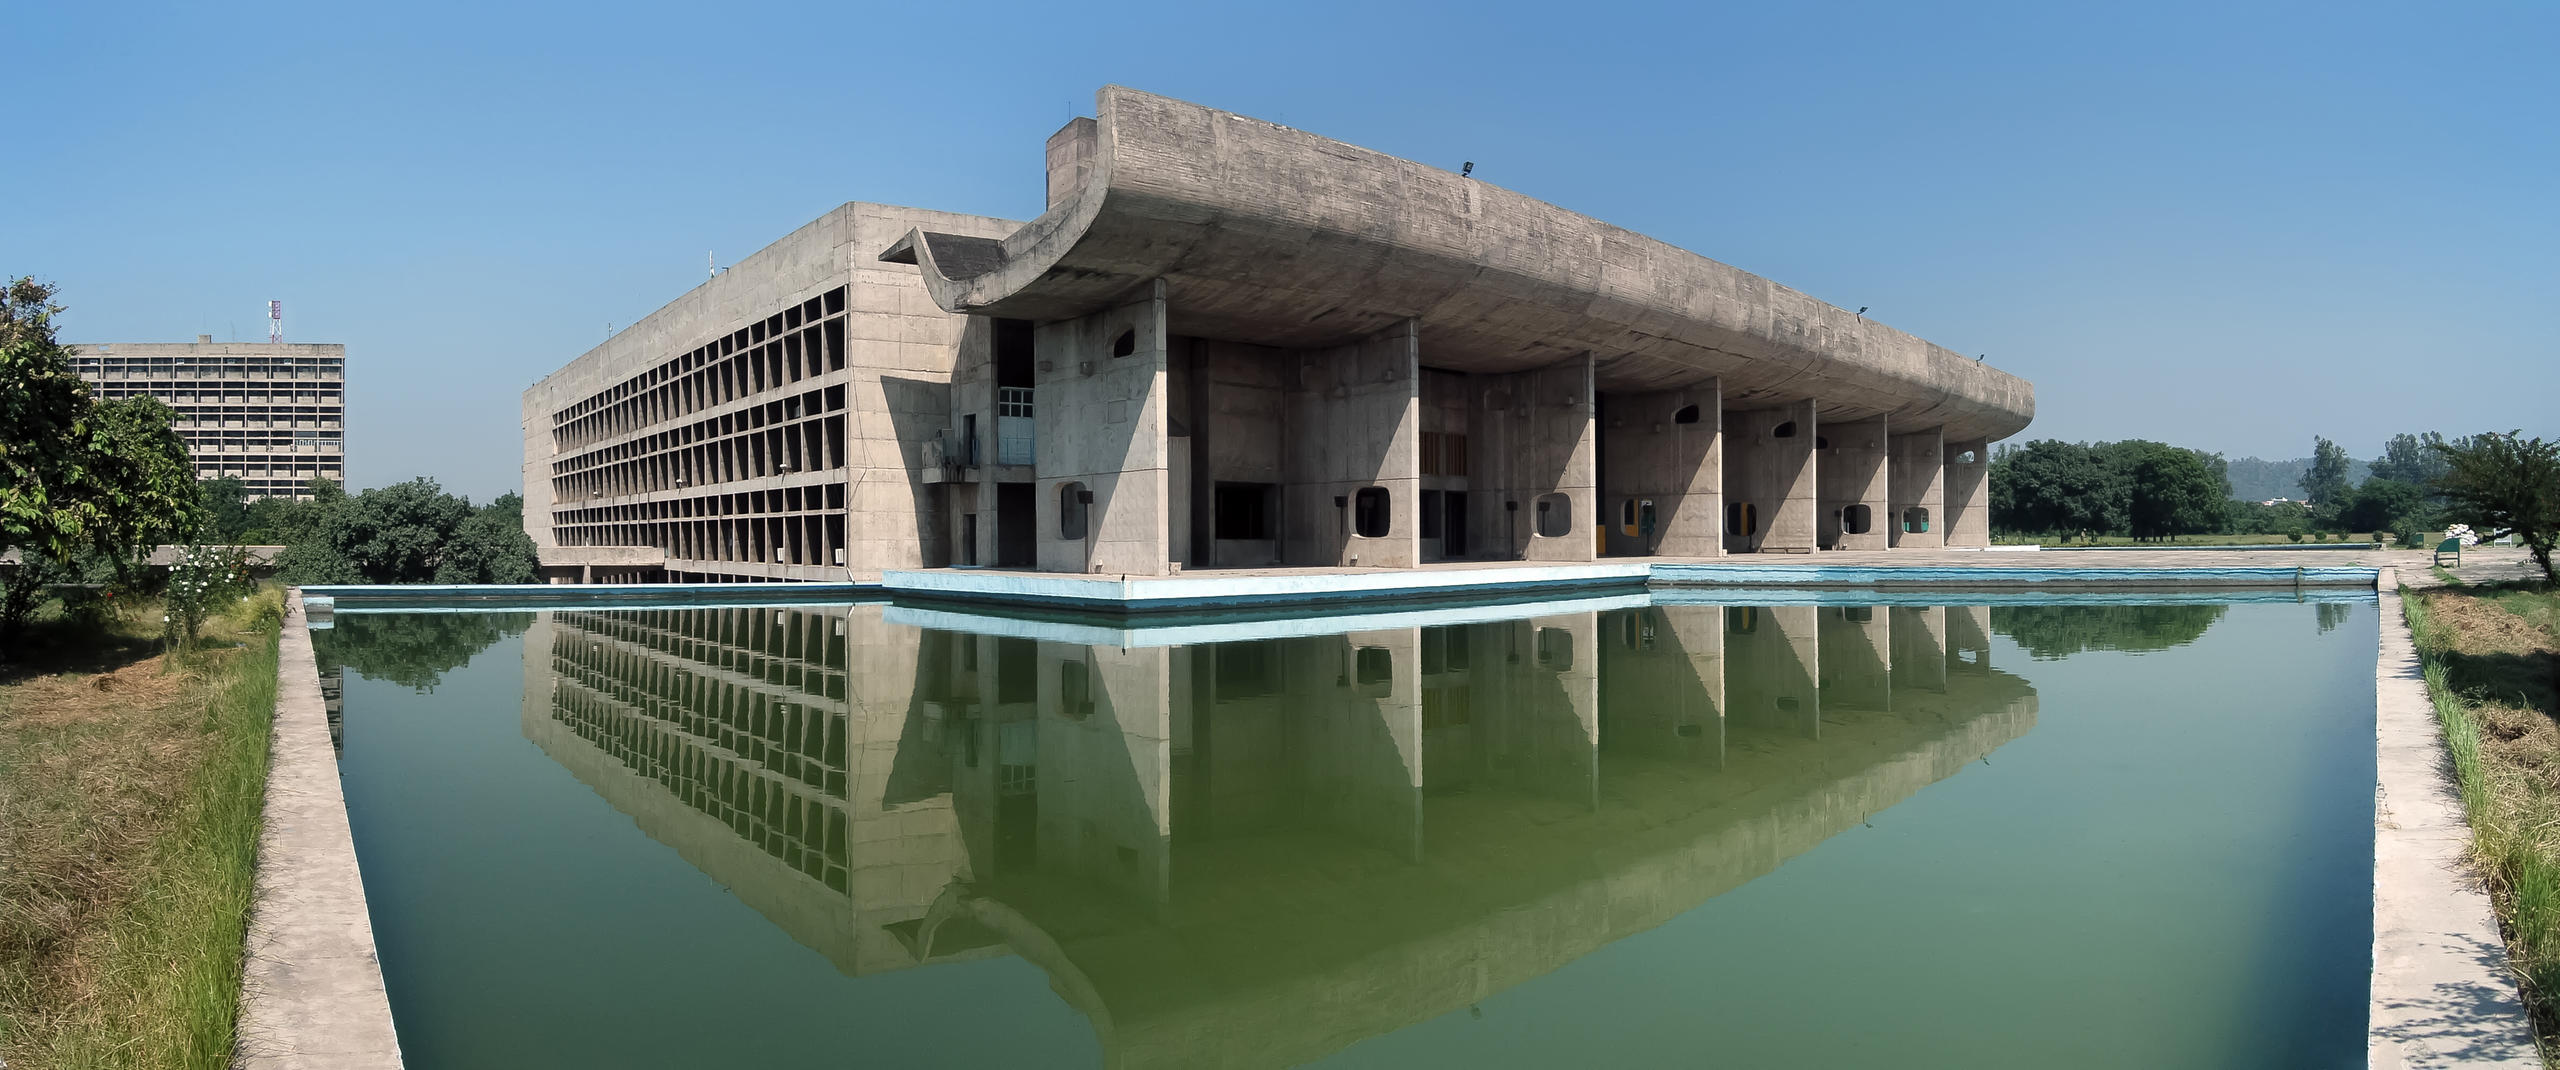 Chandigarh Assembly building, built in 1955 by Le Corbusier